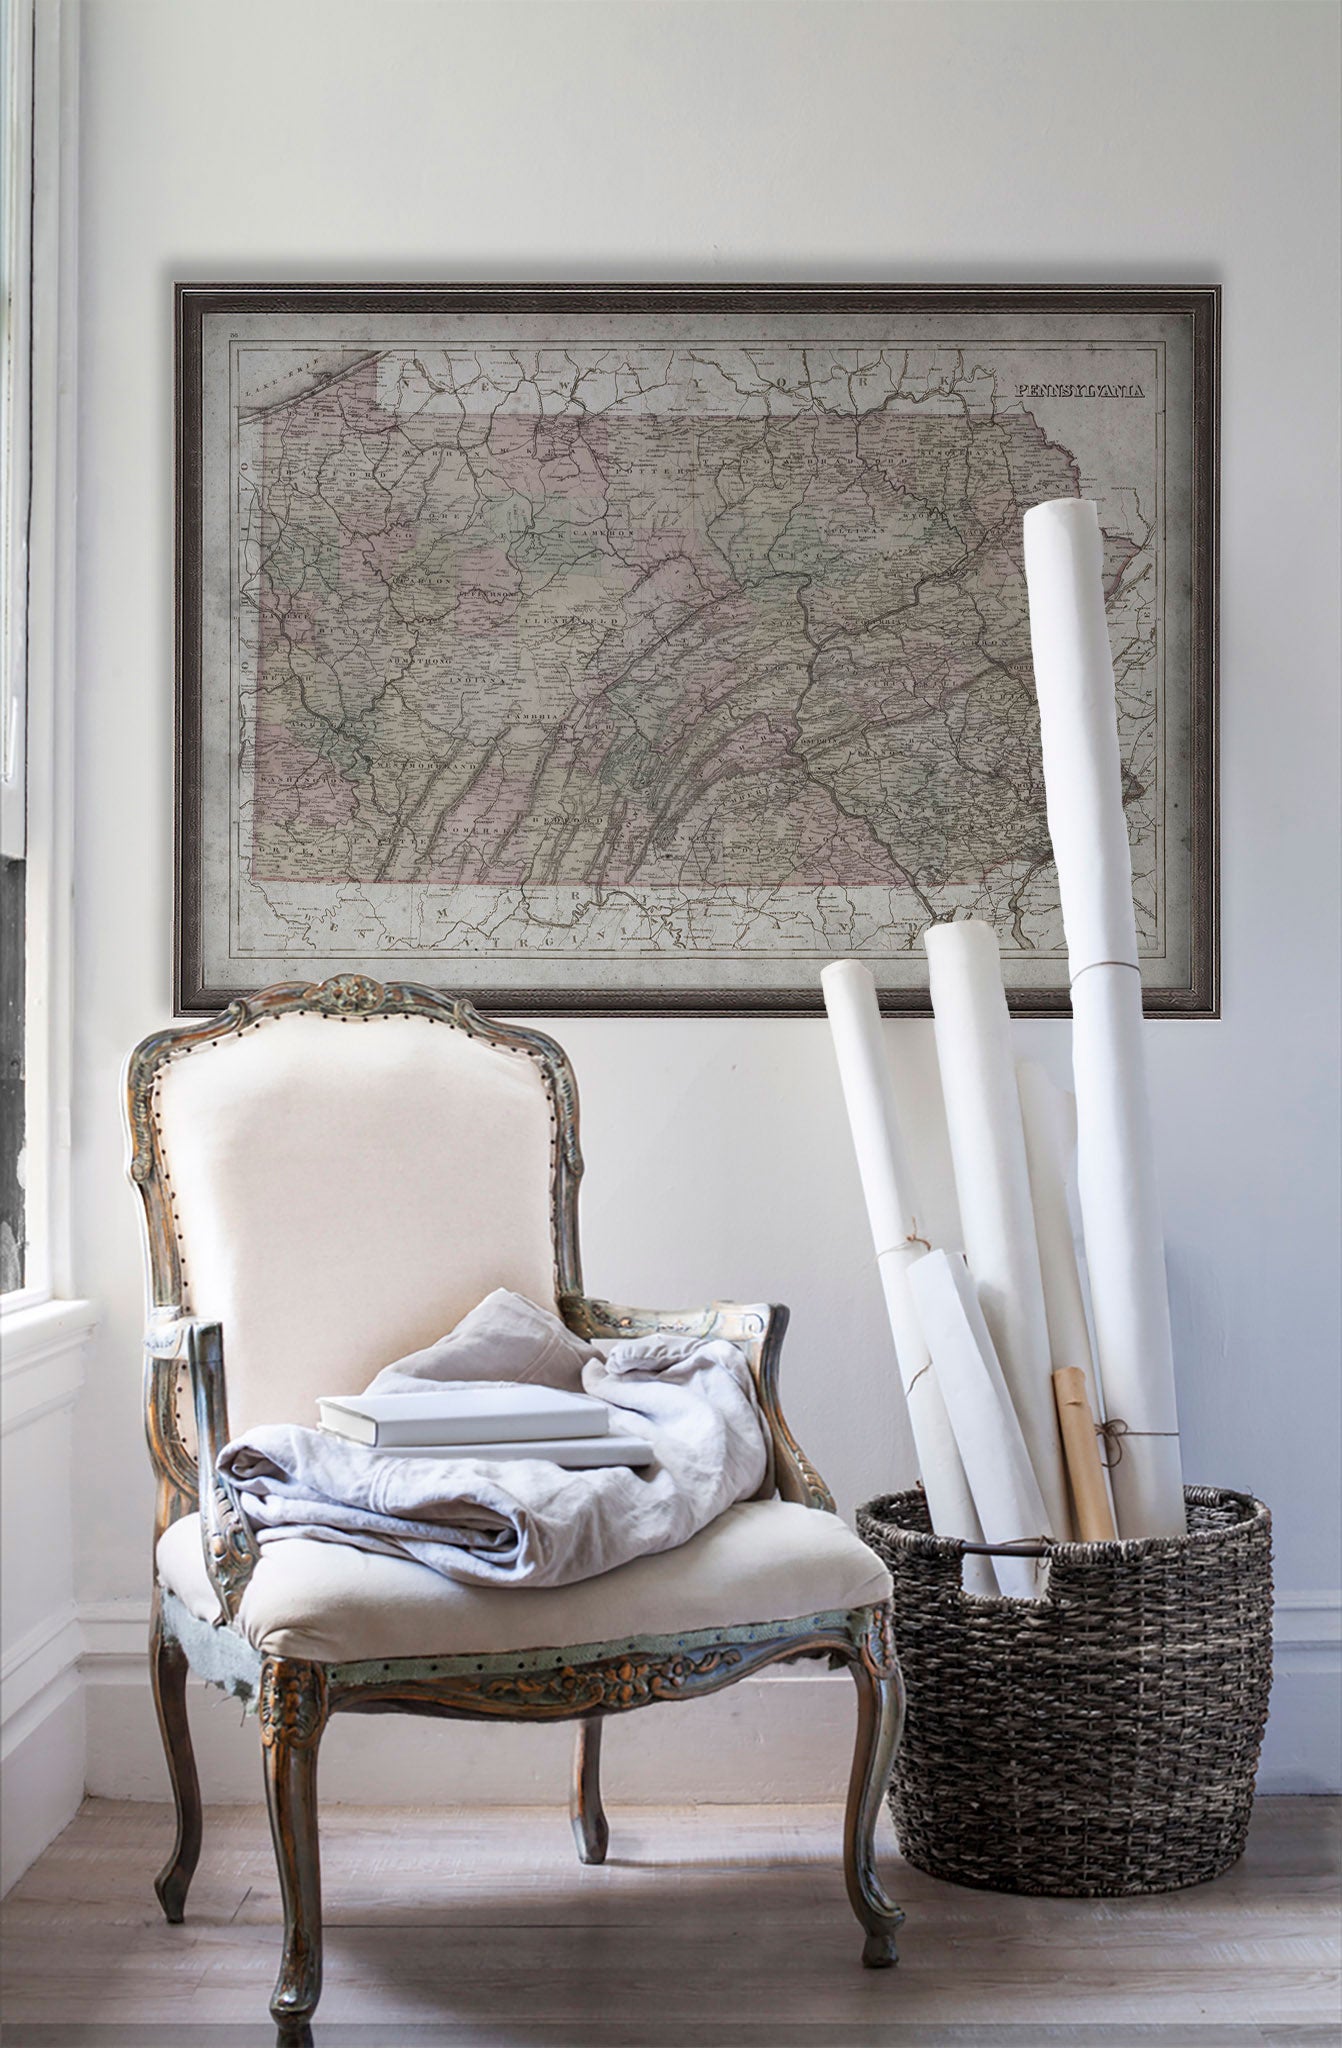 Vintage historic map of Pennsylvania in room with white walls with vintage furniture and vintage decor.